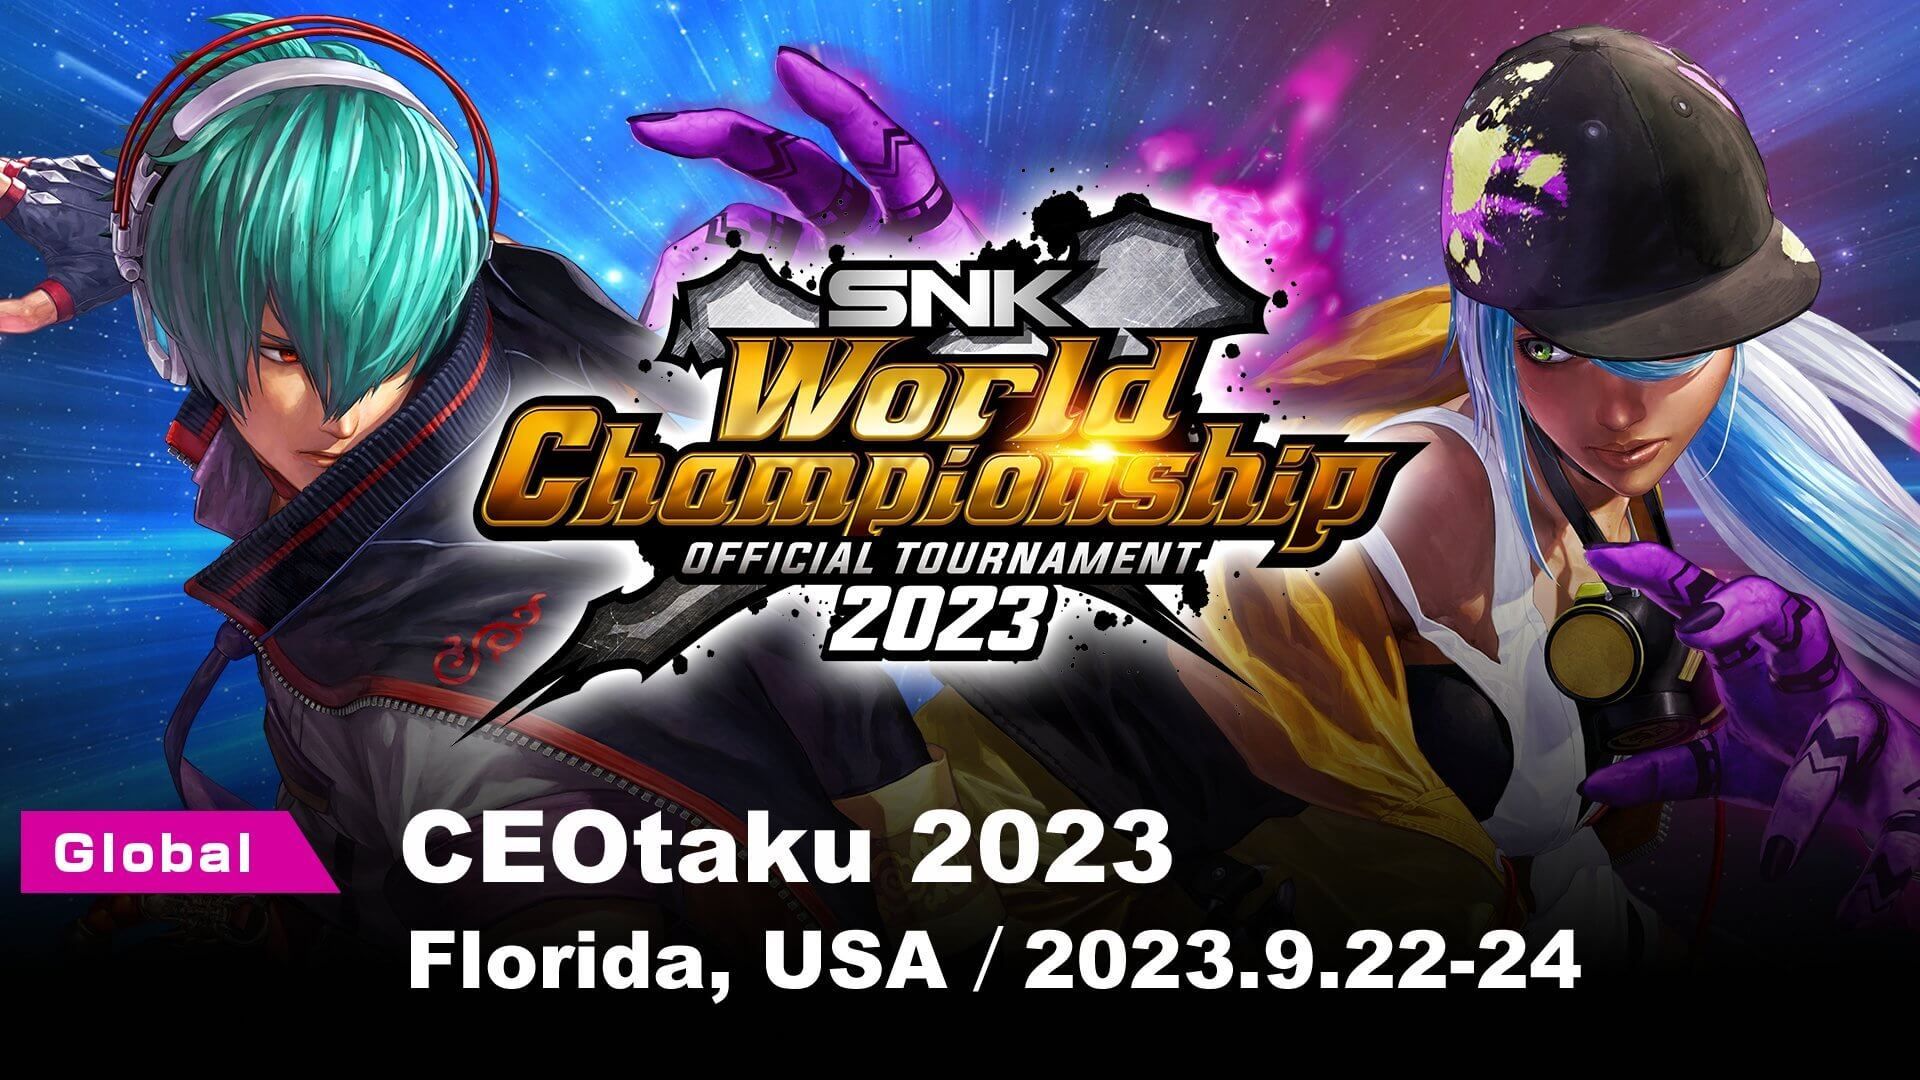 CEOtaku is an Official Qualifier Event for the SNK World Championship